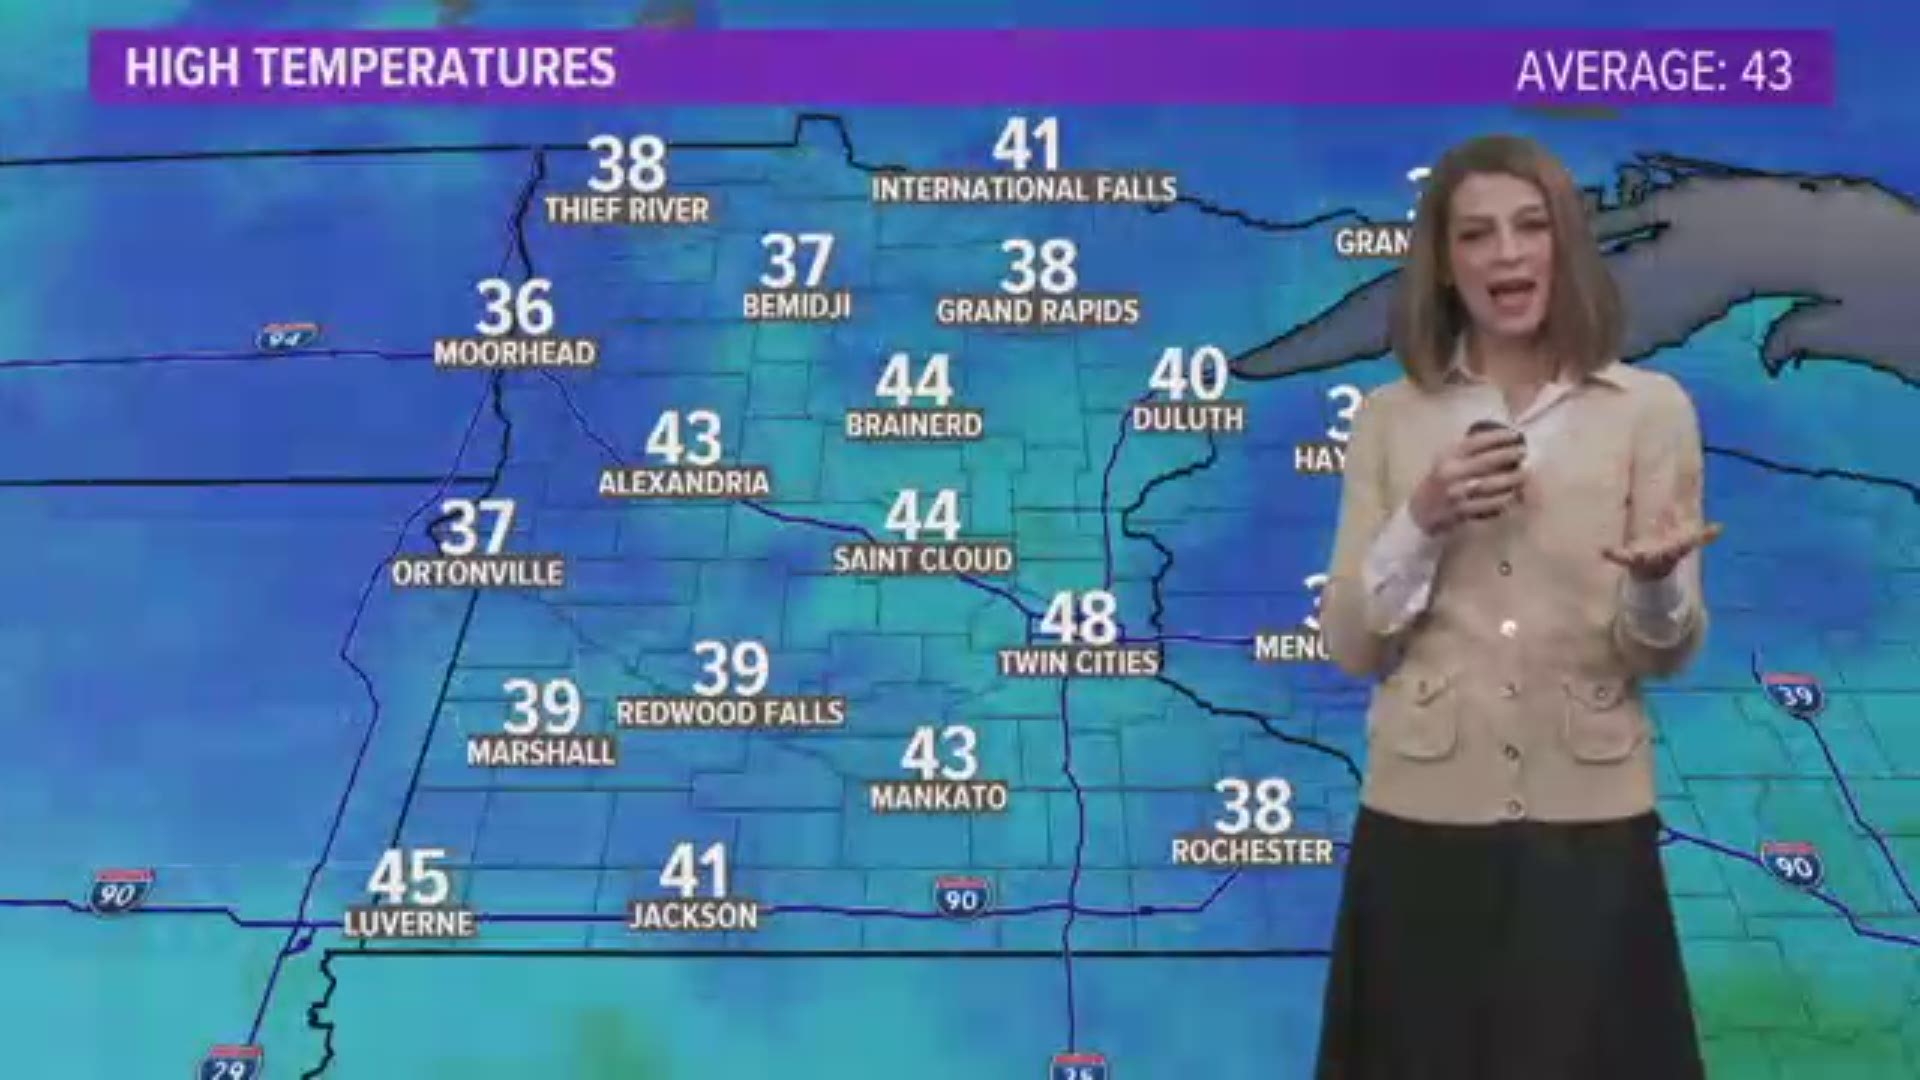 Laura's forecast on Wednesday, March 20, 2019.